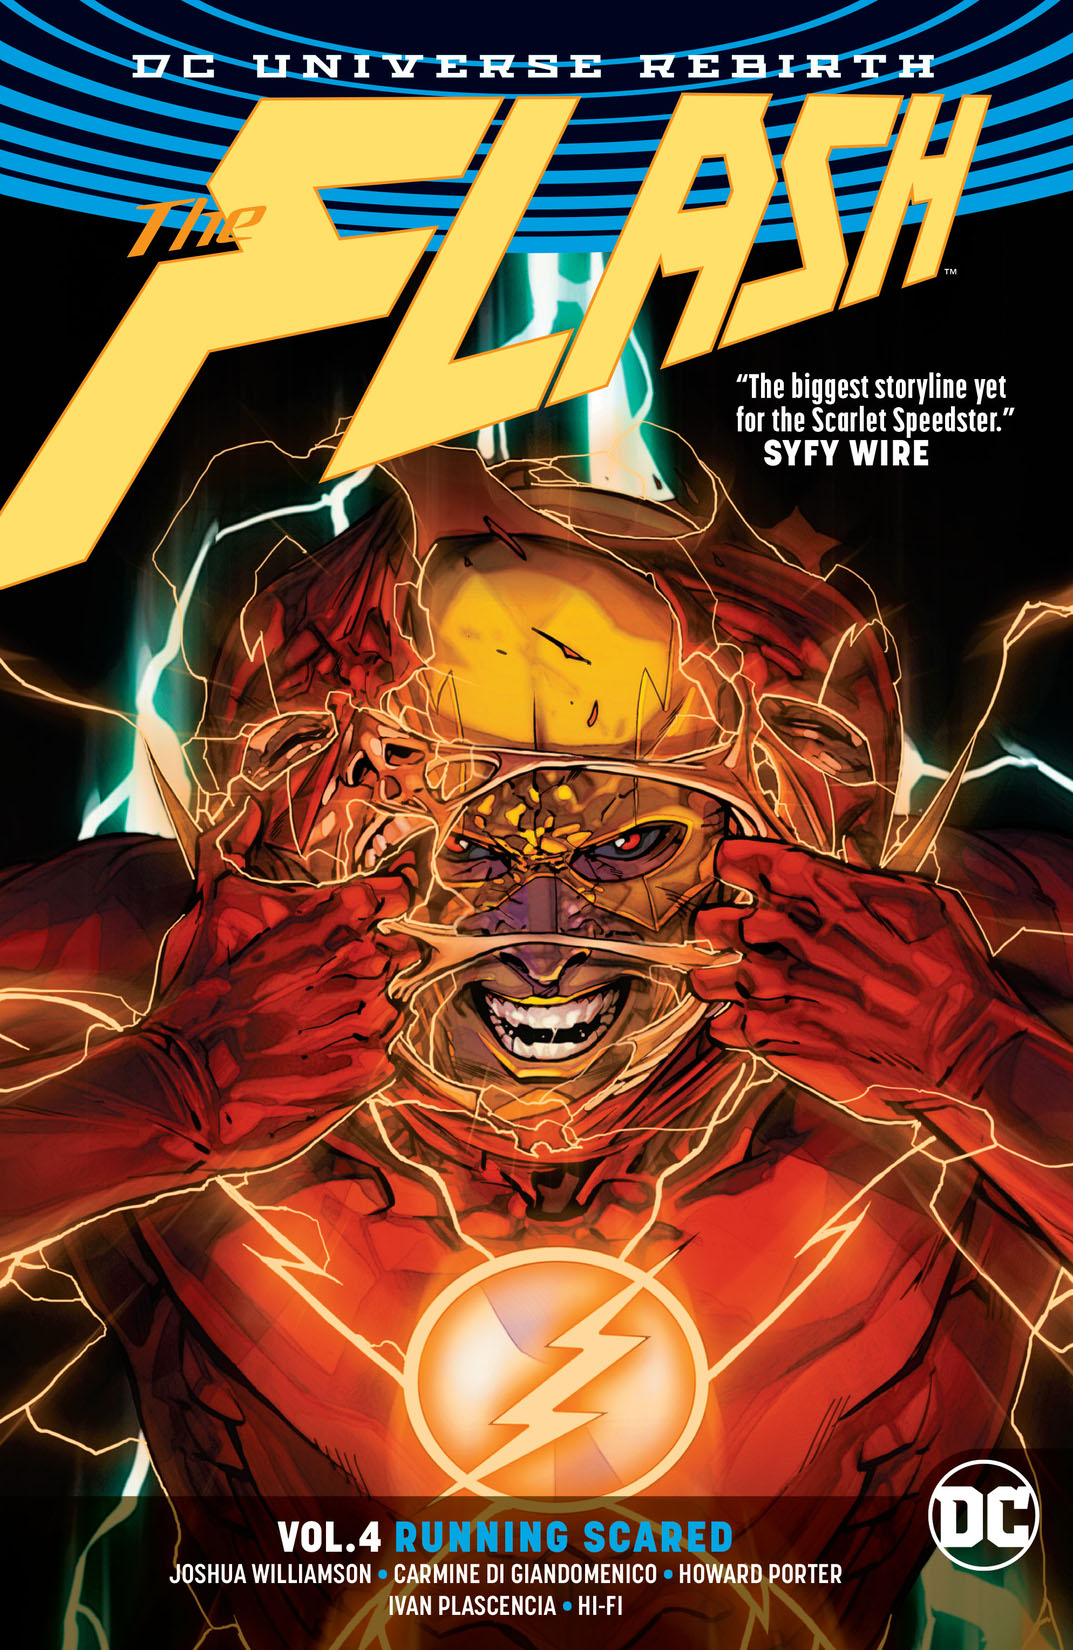 Flash Vol. 4: Running Scared (Rebirth) preview images